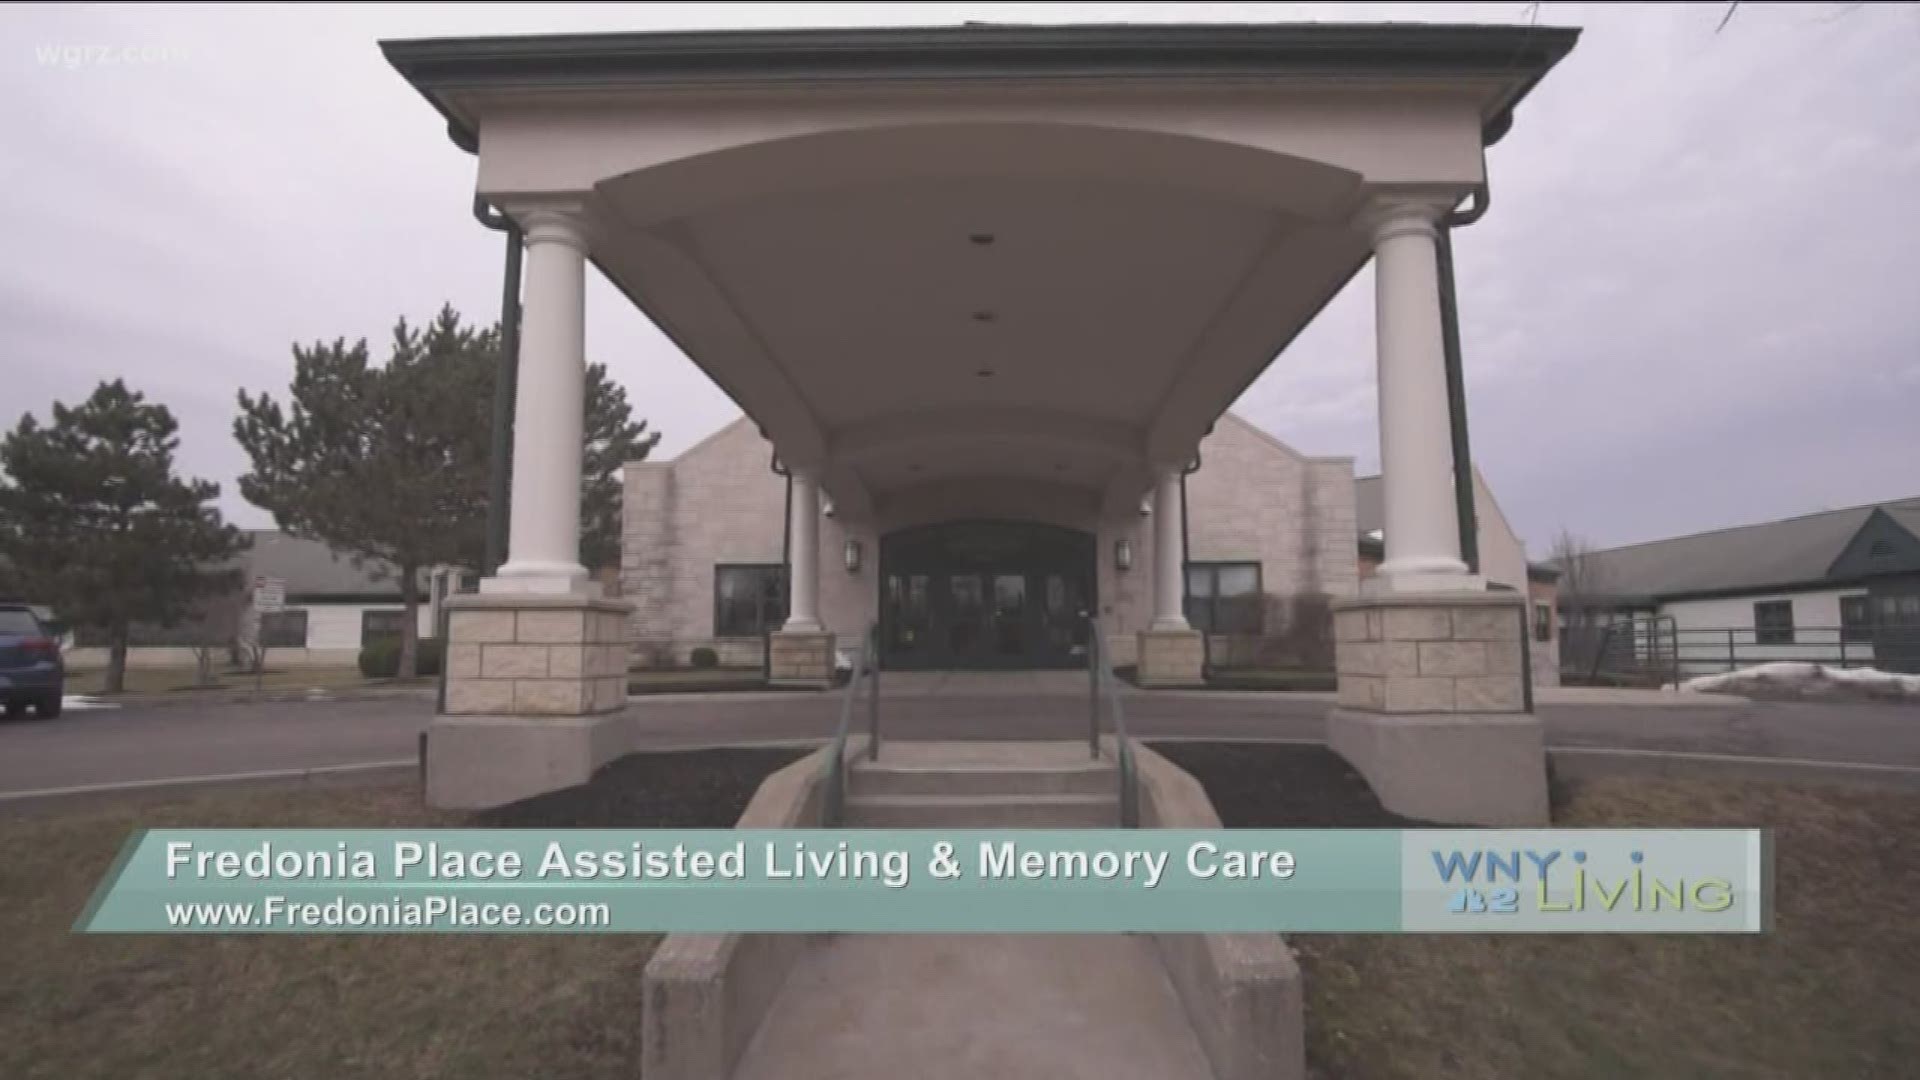 October 5 - Fredonia Place Assisted Living & Memory Care